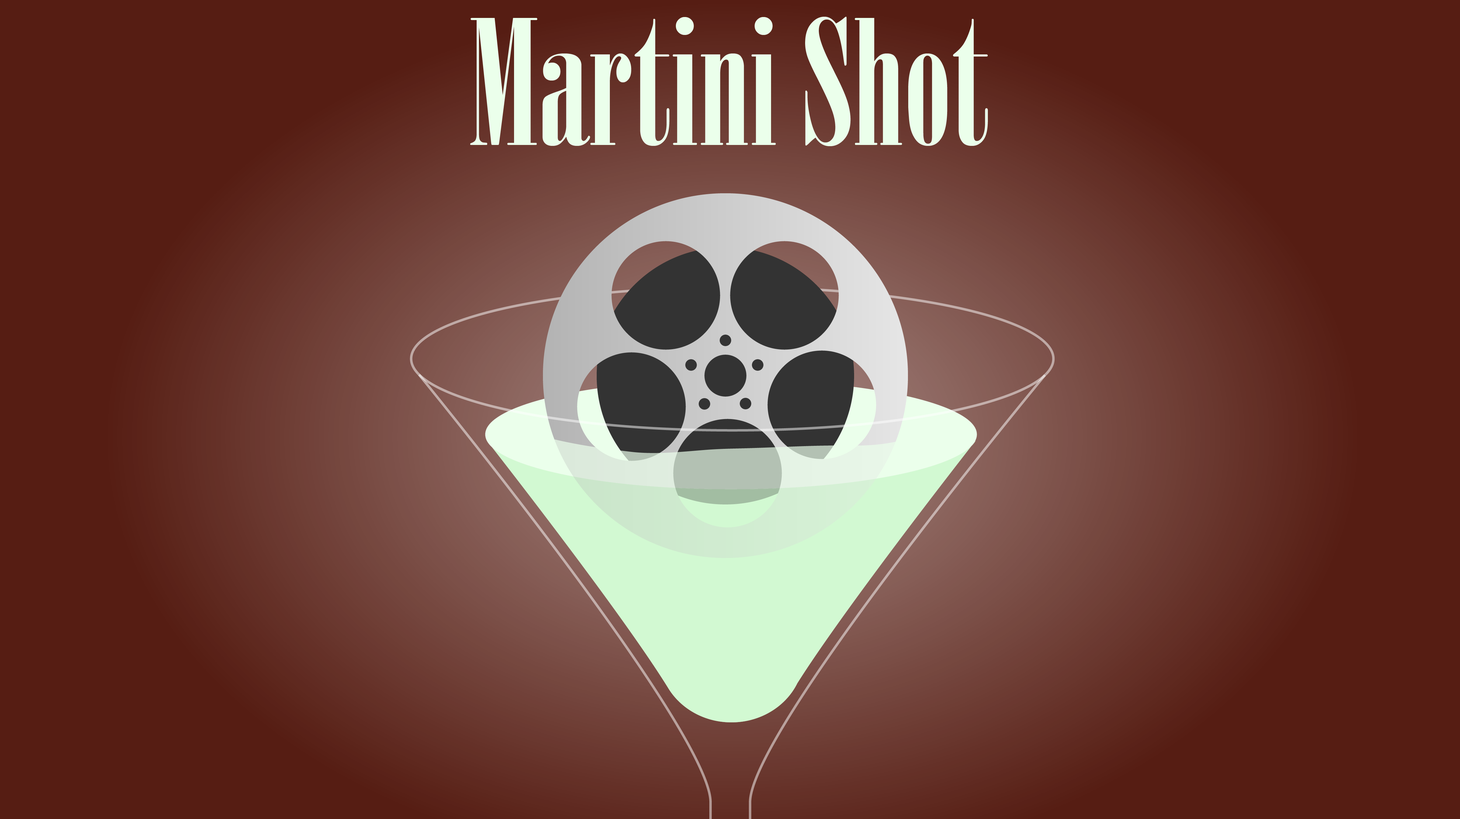 This is Rob Long, and on today’s Martini Shot I take a long boat trip to interesting and exotic places, and end up heading back to the boat for pizza night, which is a metaphor I hope everyone can relate to.